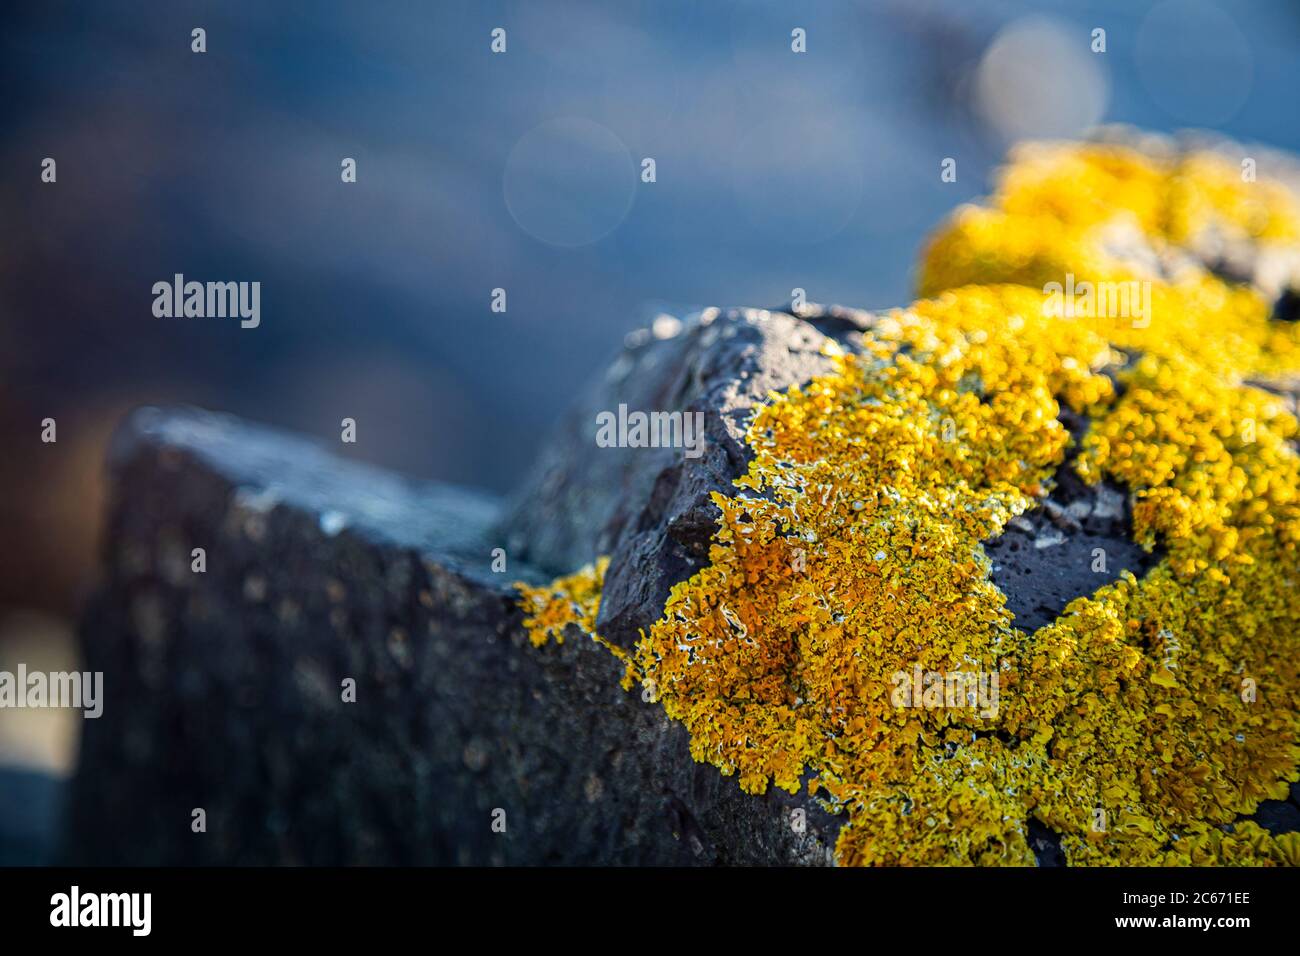 CloseUp photo Stones and Rocks on a seashore covered with yellow moss with blue sea background Stock Photo